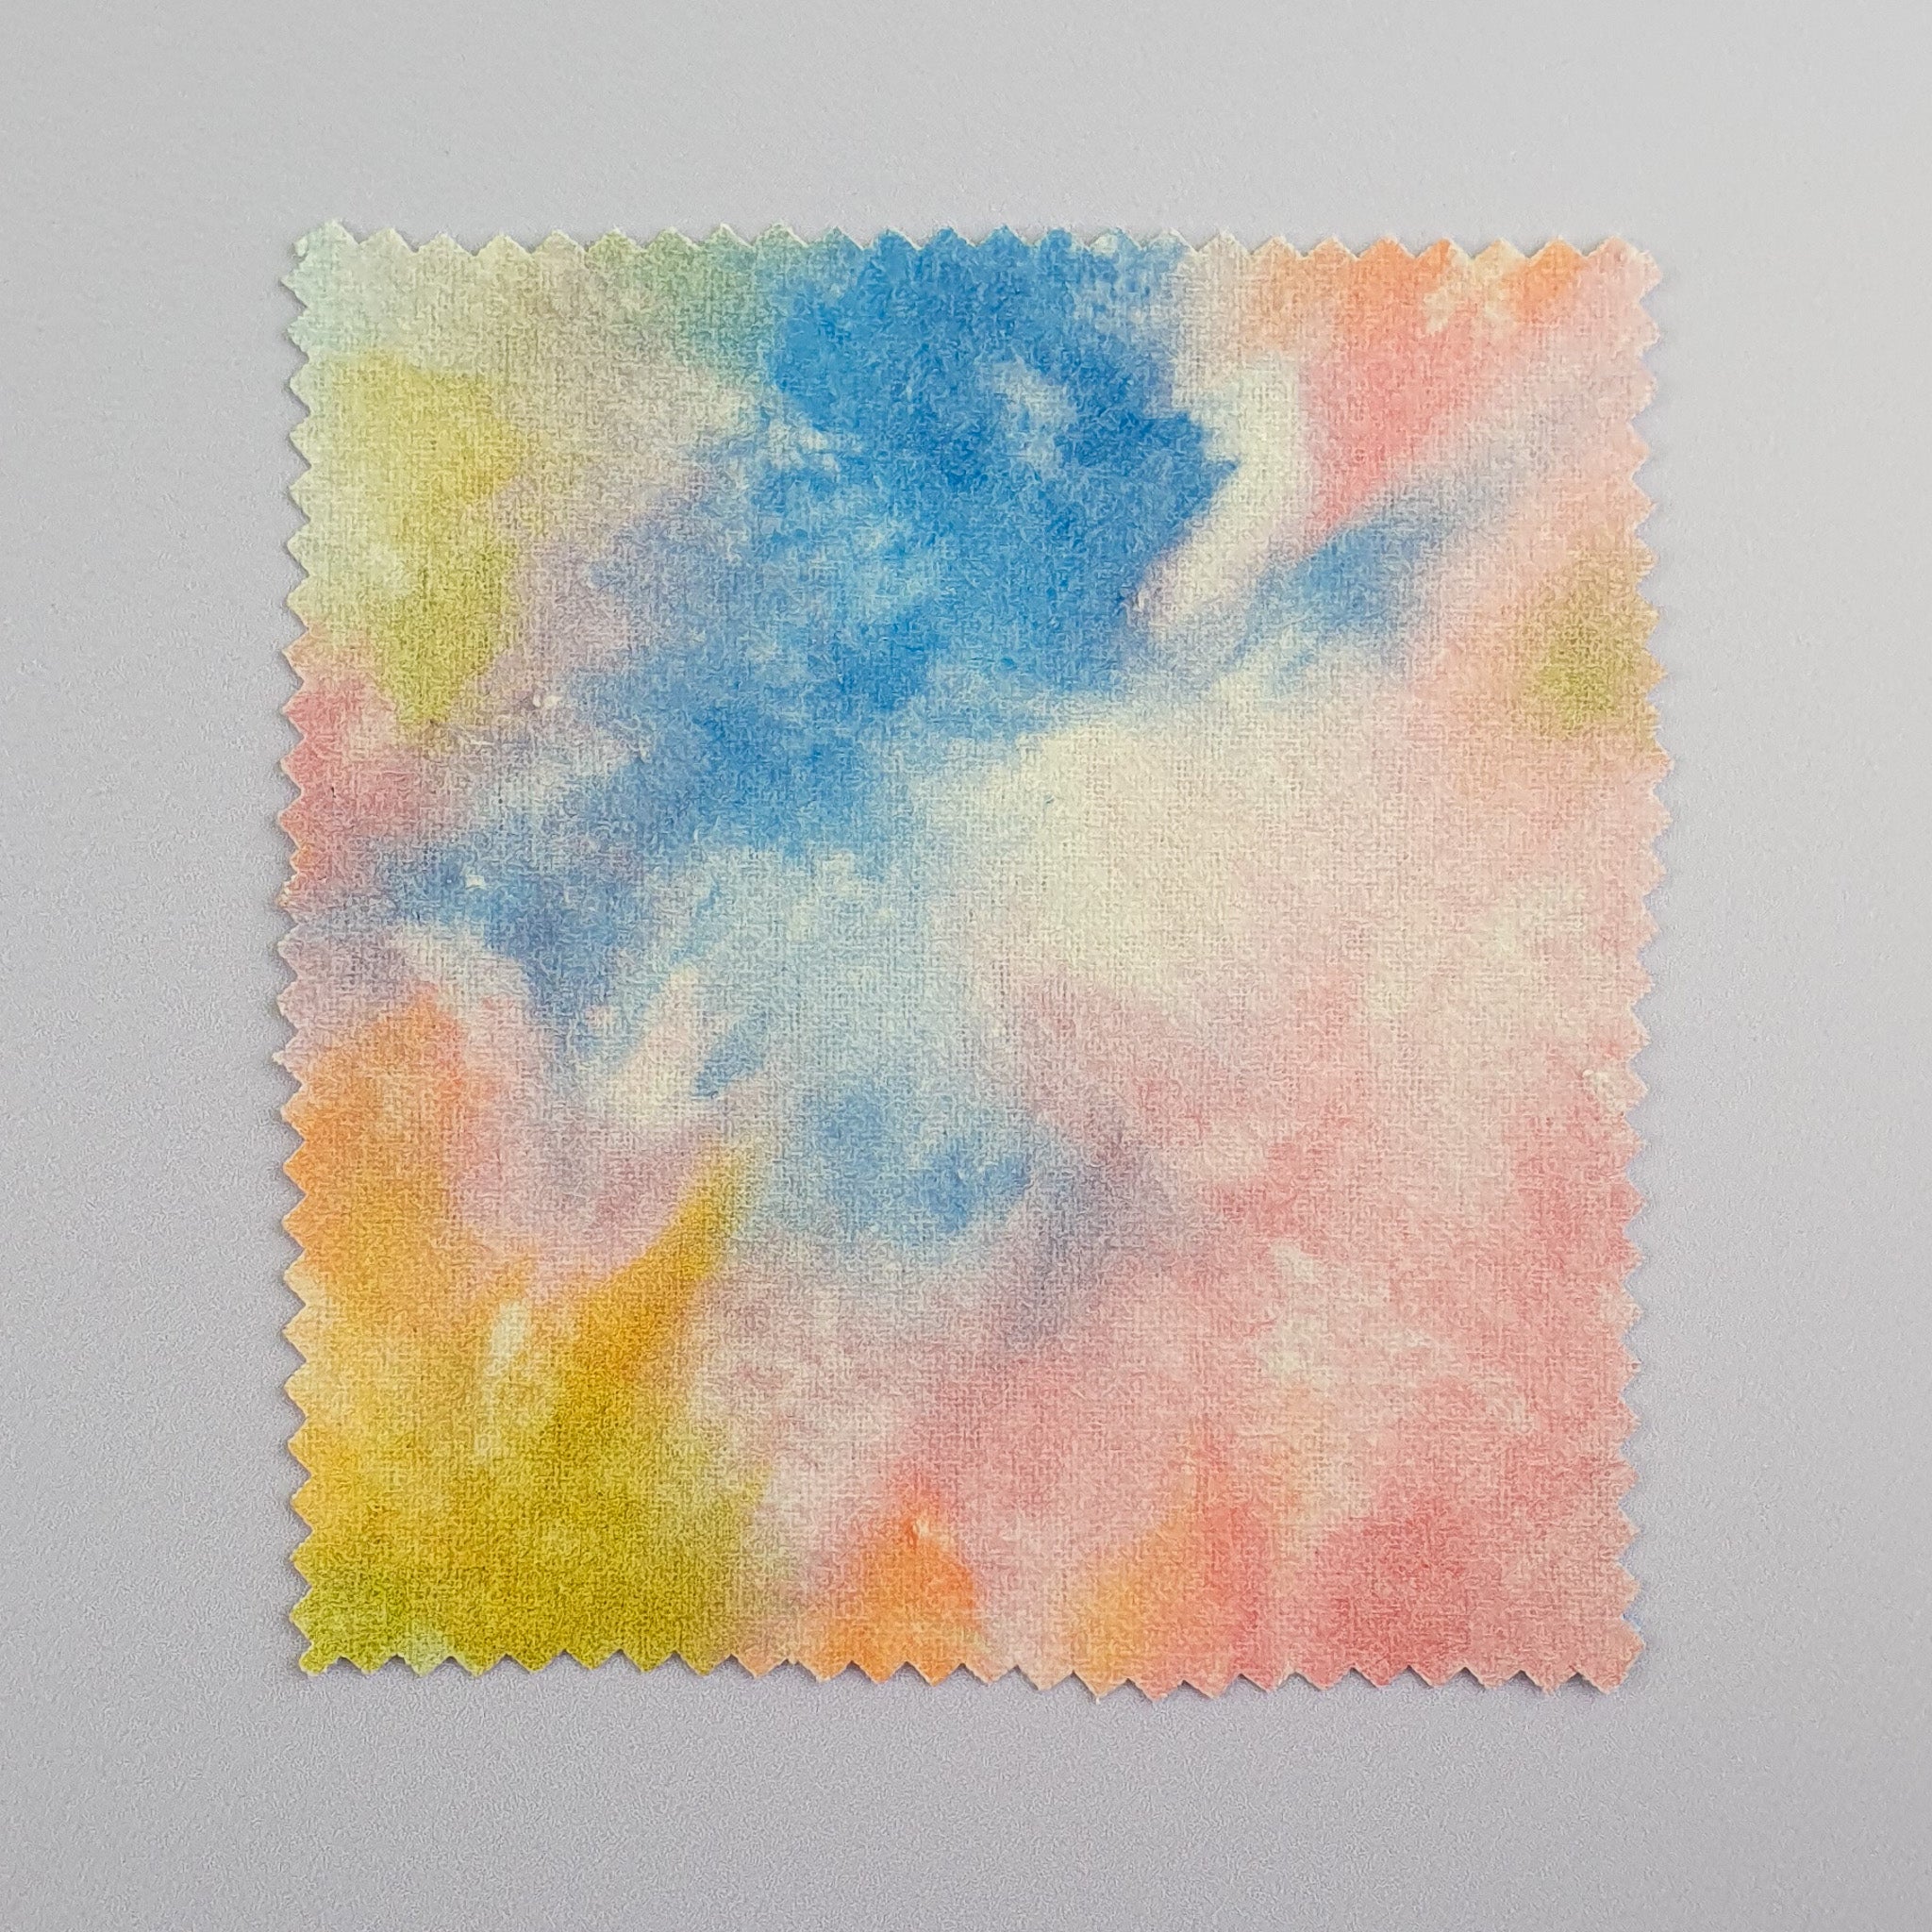 Grime Guard Tie Dye Fabric Swatch